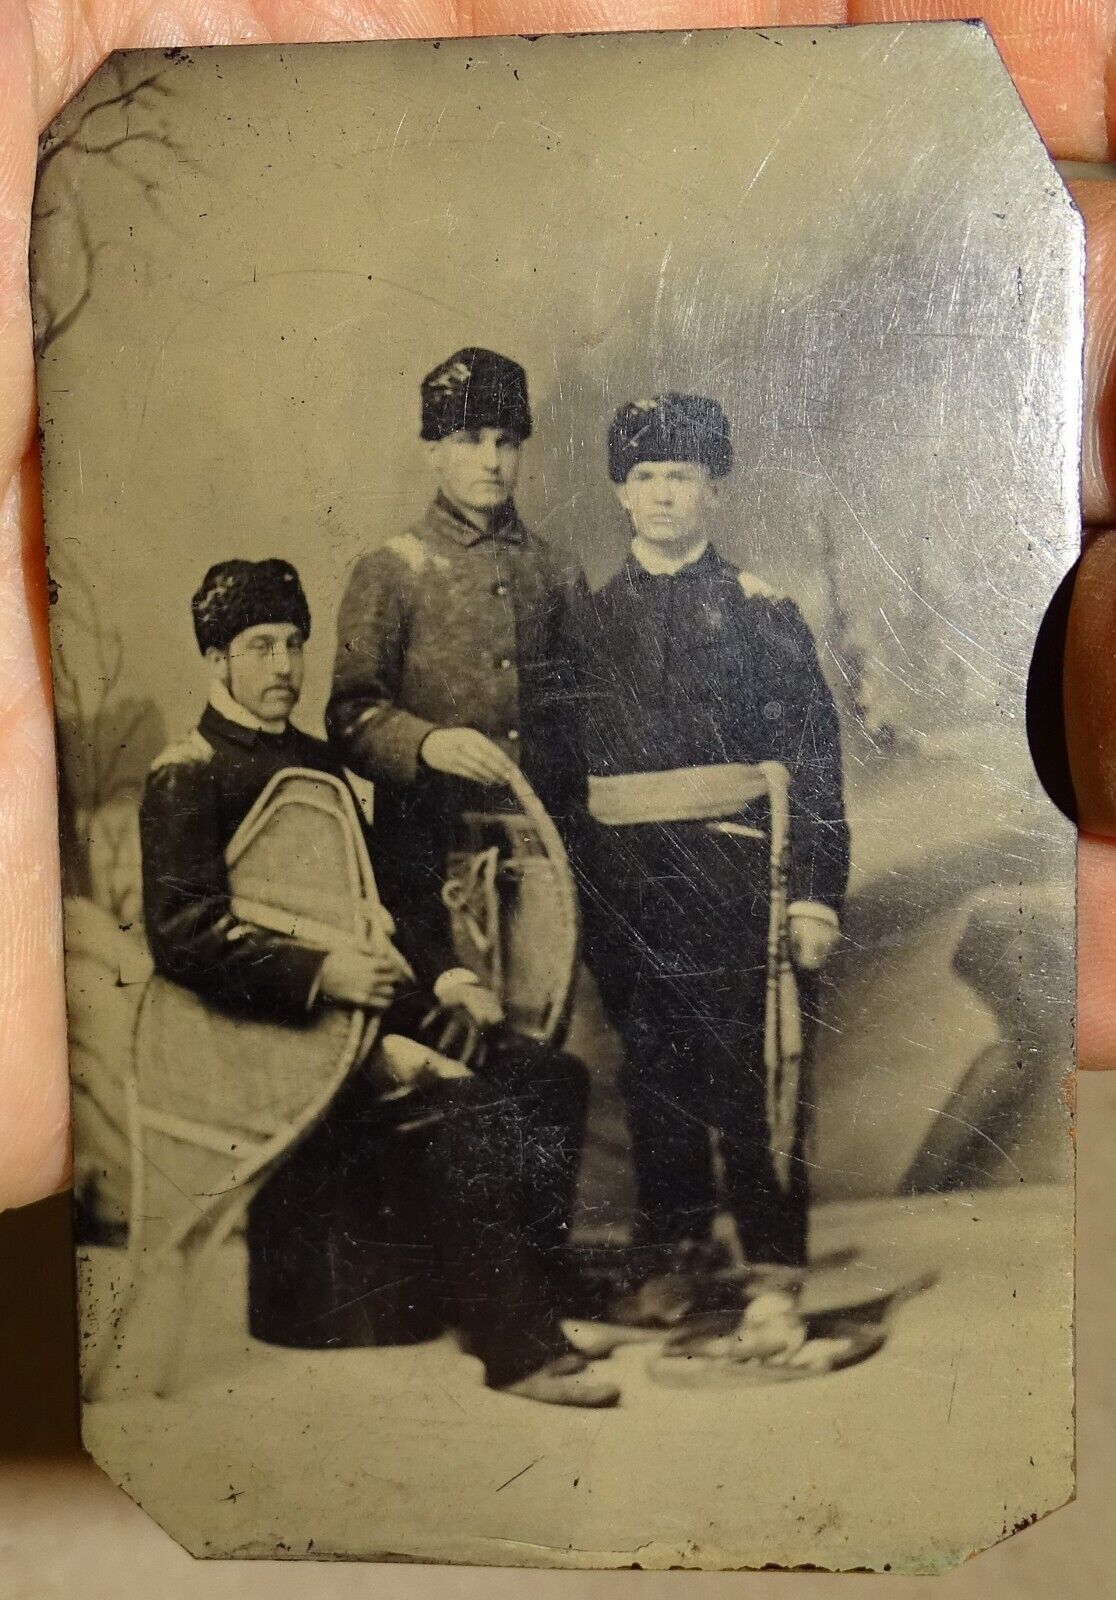 Soldiers in Fur Hats with Snowshoes Tin Type Photograph